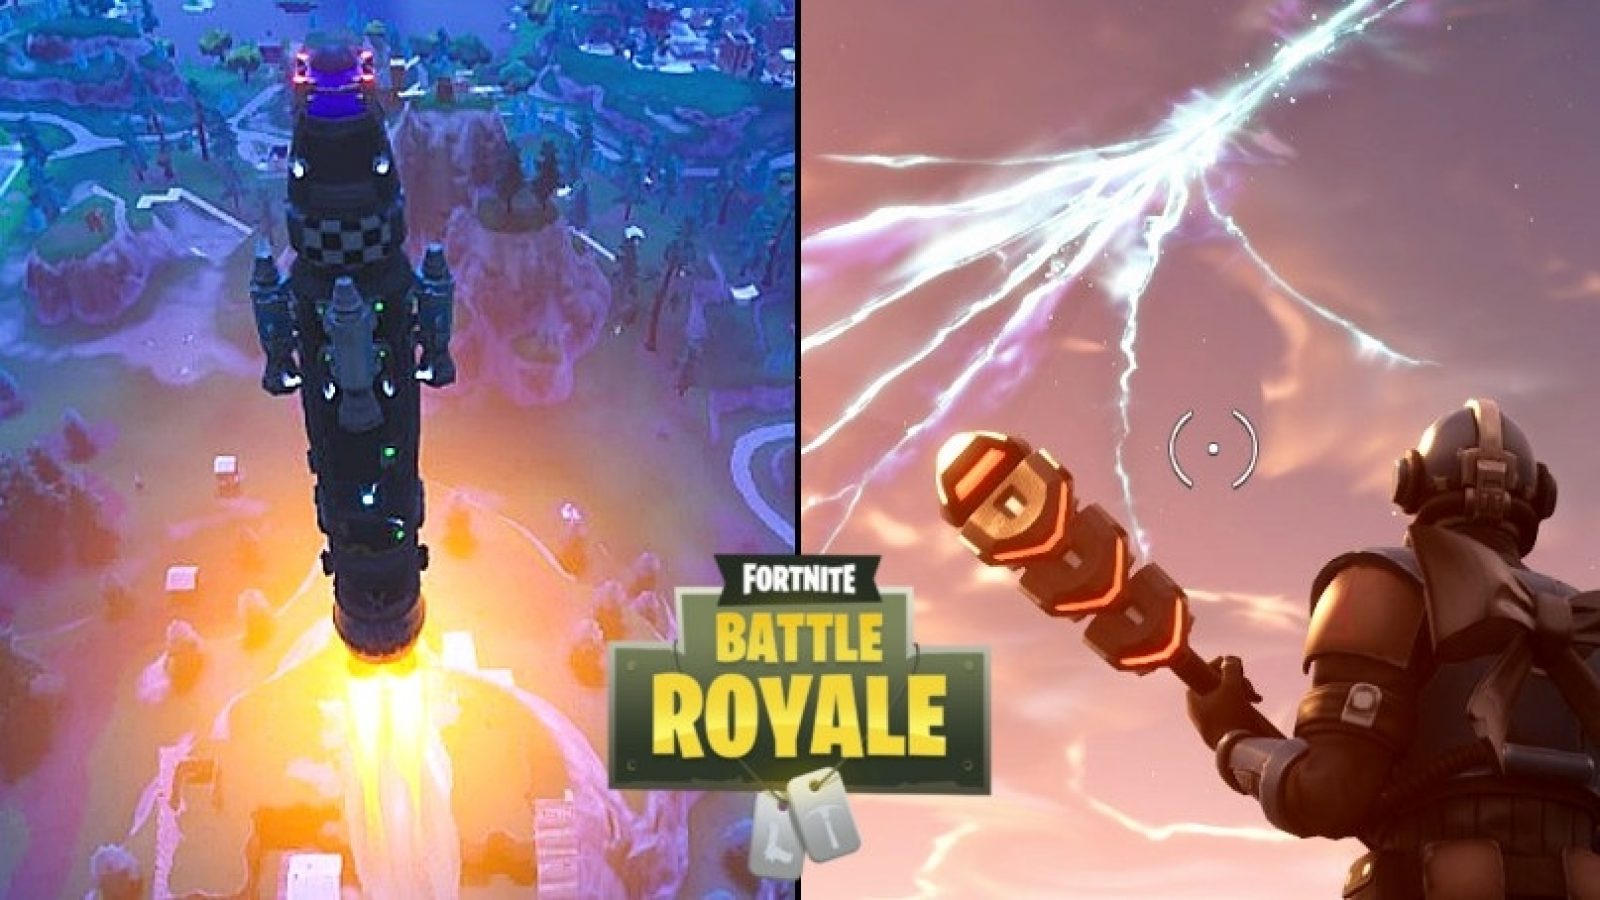 The Rocket Has Launched In Fortnite Footage And Image